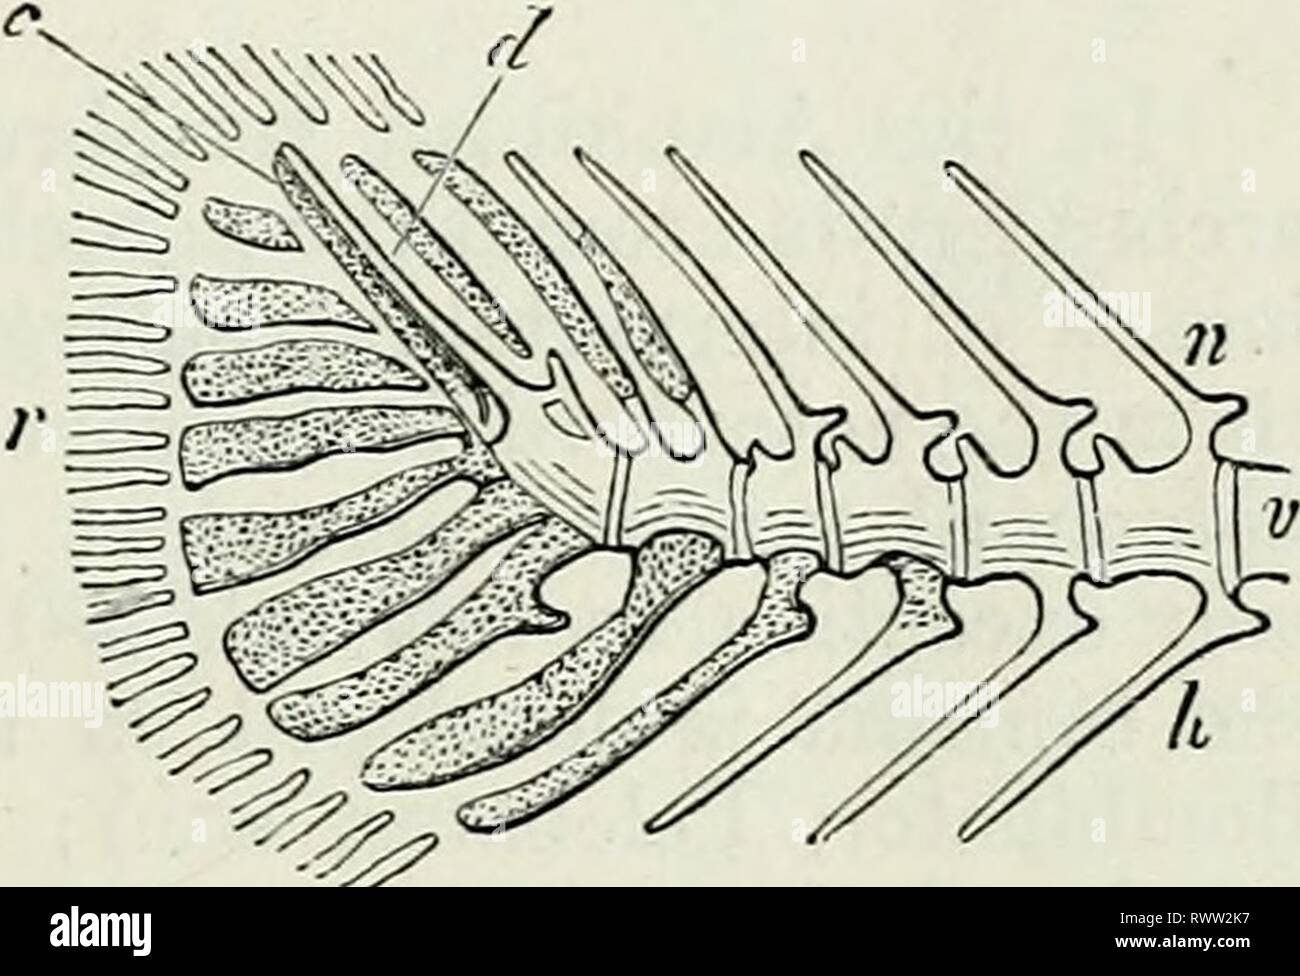 Elements of Comparative Anatomy (1878) Elements of Comparative Anatomy elementsofcompar78gege Year: 1878  VEETEBE.E OF VERTEBEATA. 431 trunk, the lower arches are divided into ribs, and supporting transverse processes (parapophyses). In the tail of the Selachii and Ganoidei they are continuously connected with the centrum, and run out into spinous processes, just like the upper arches. In the Teleostei the costiferous transverse processes gradually converge, in the caudal region, and form inferior arches, which are not homologous with those of the Selachii and Ganoidei, although they also form Stock Photo